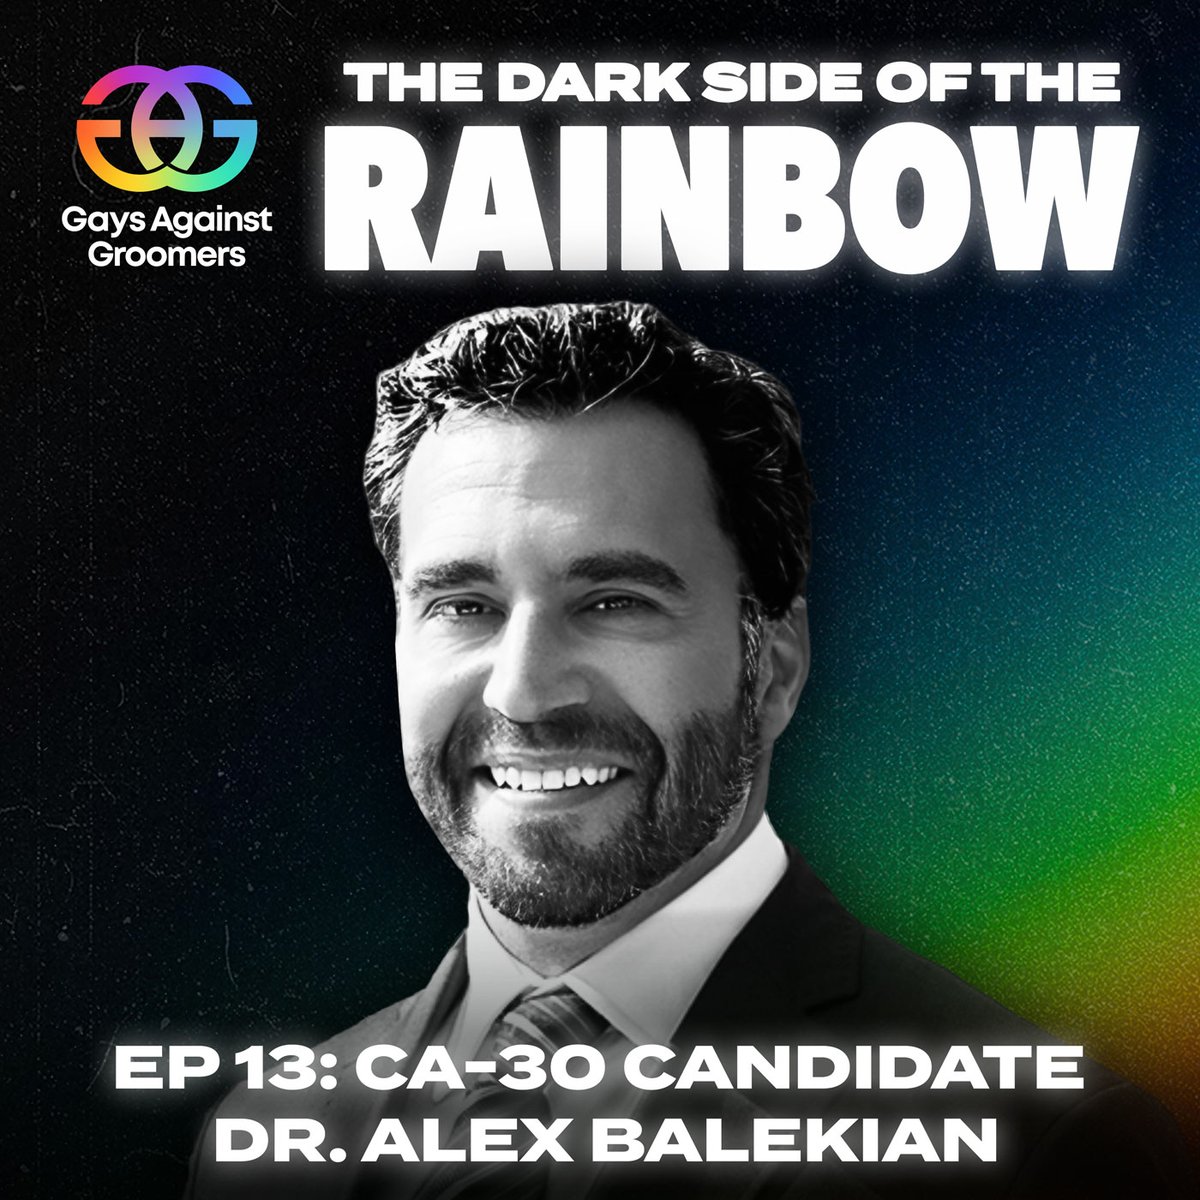 🎙️Episode 13 of The Dark Side of the Rainbow is out now! Gender Identity, Child Protection and the Law with CA-30 House Candidate Dr. @AlexBalekian Tune in for the riveting conversation surrounding the battle to protect children from the radical trans agenda. Available now